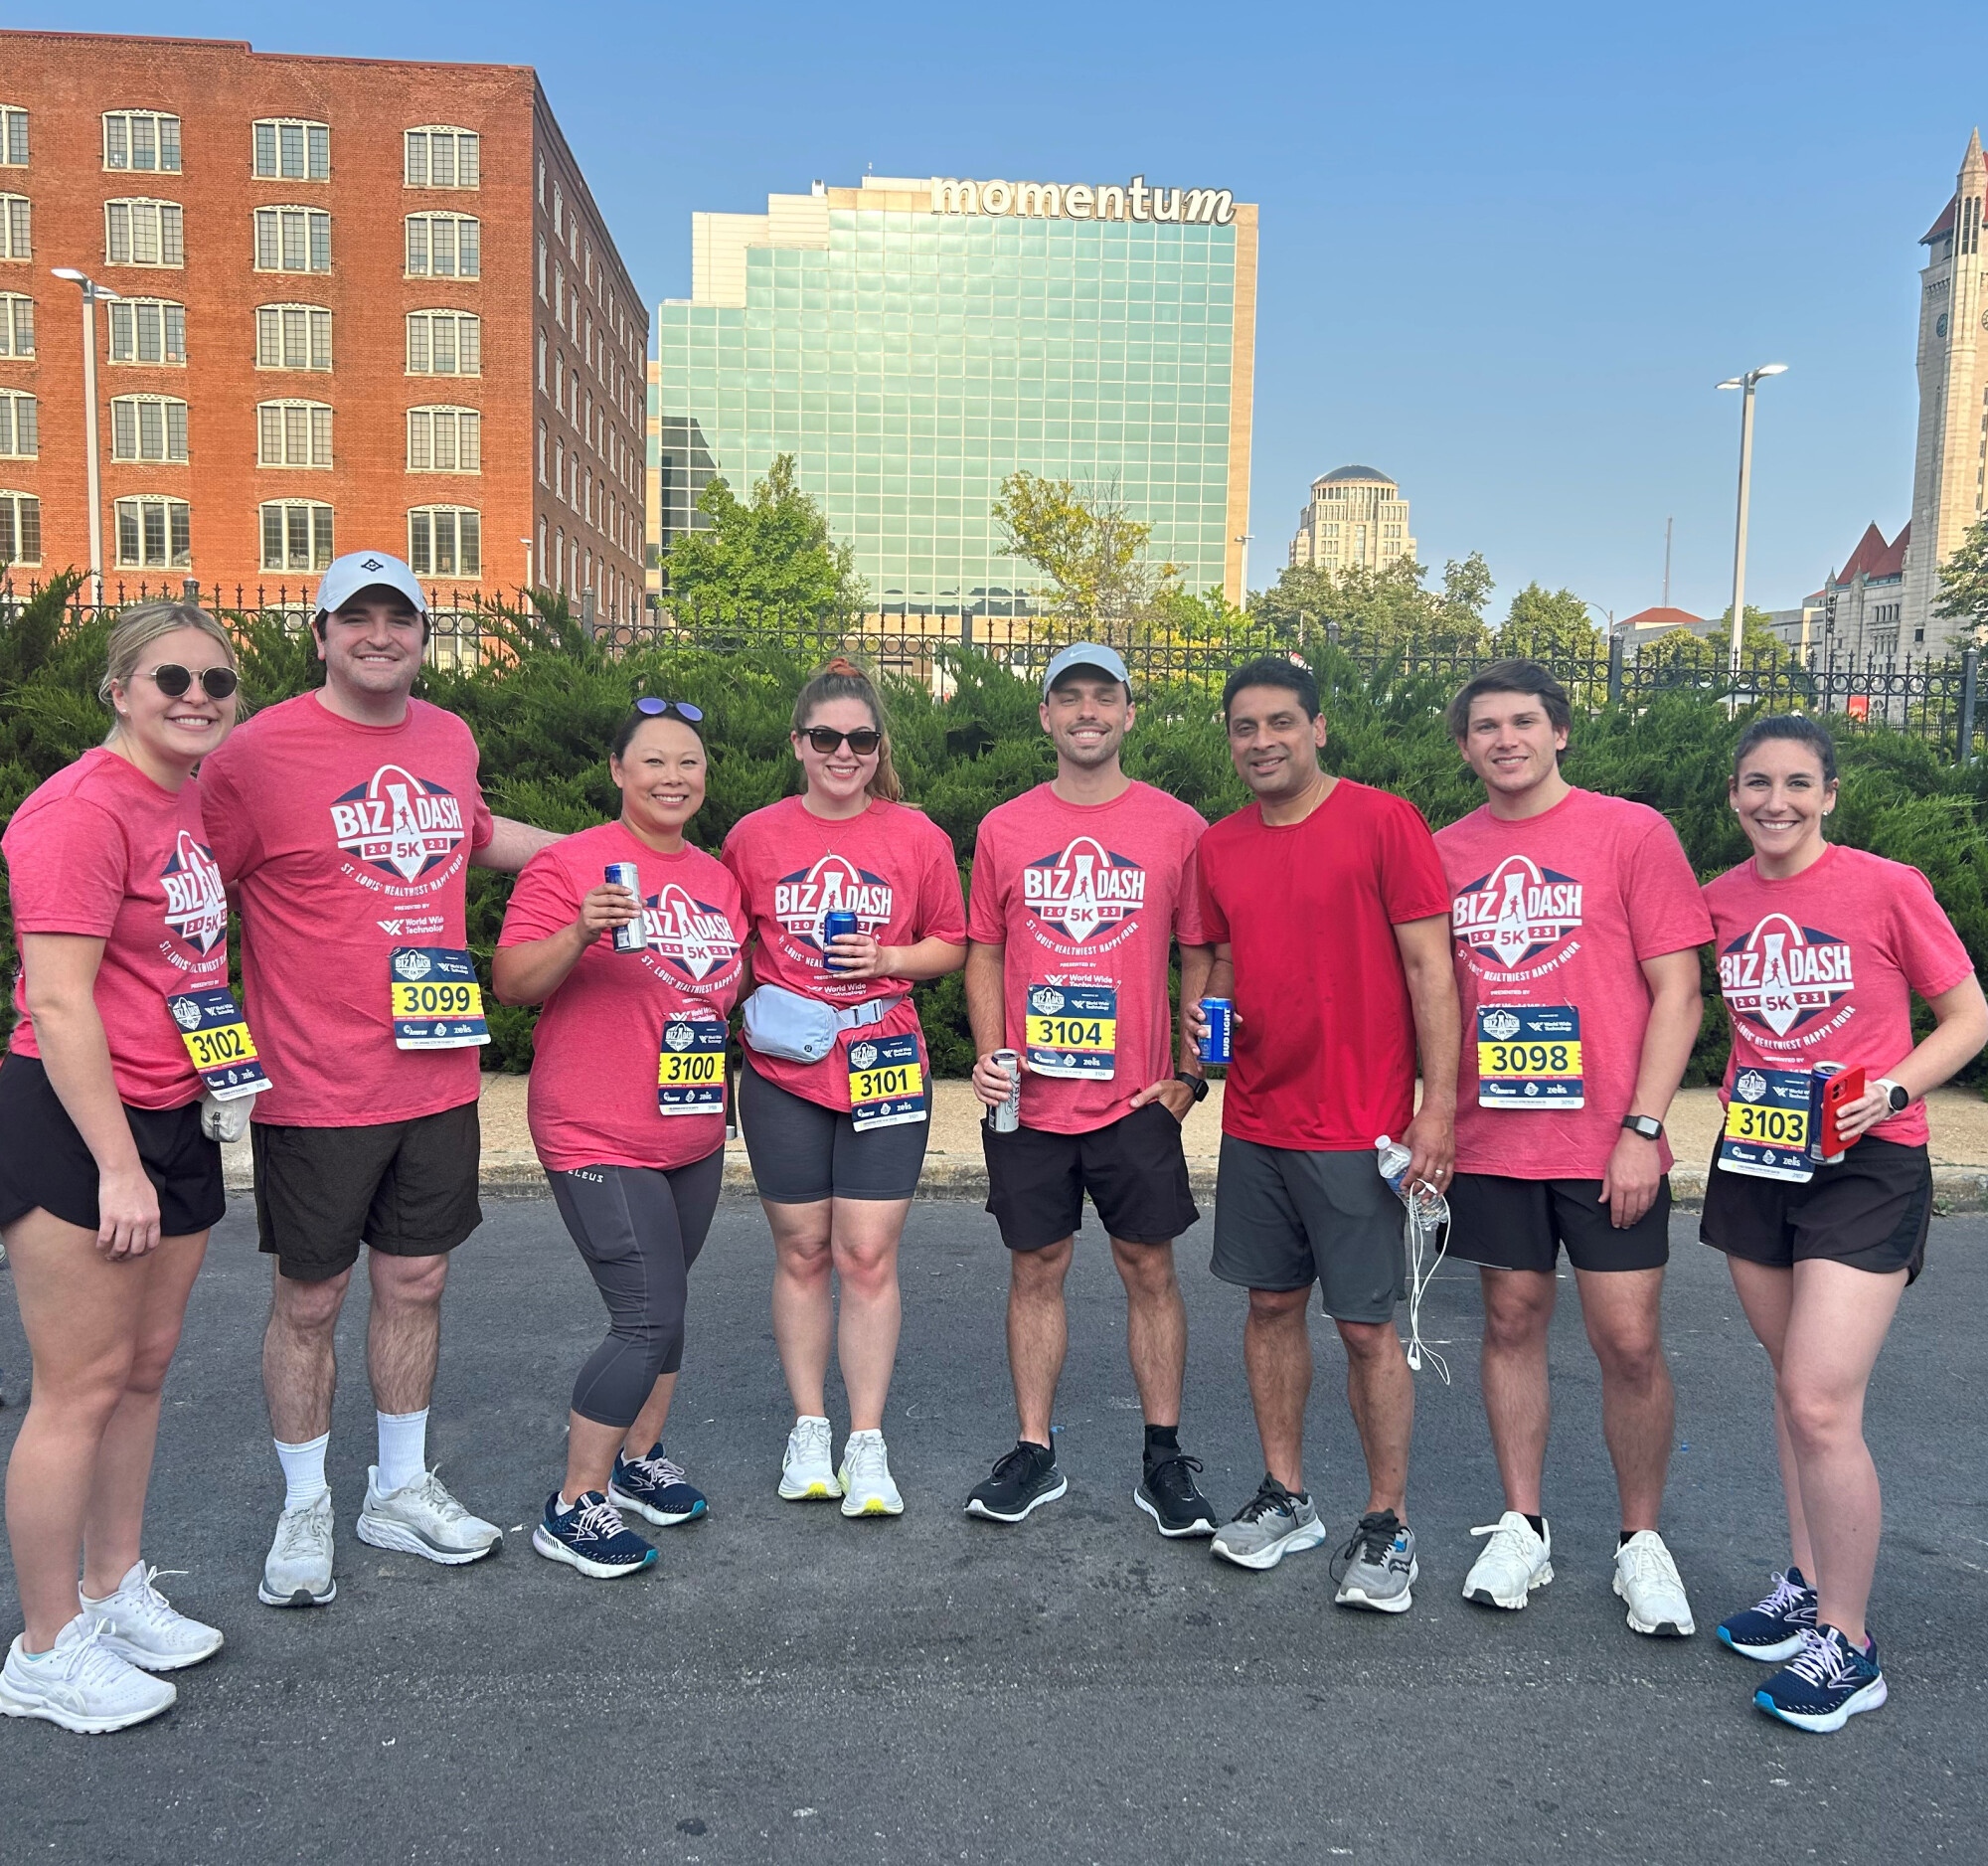 8 people in pink t-shirts, dark shorts, and running shoes with large buildings in background